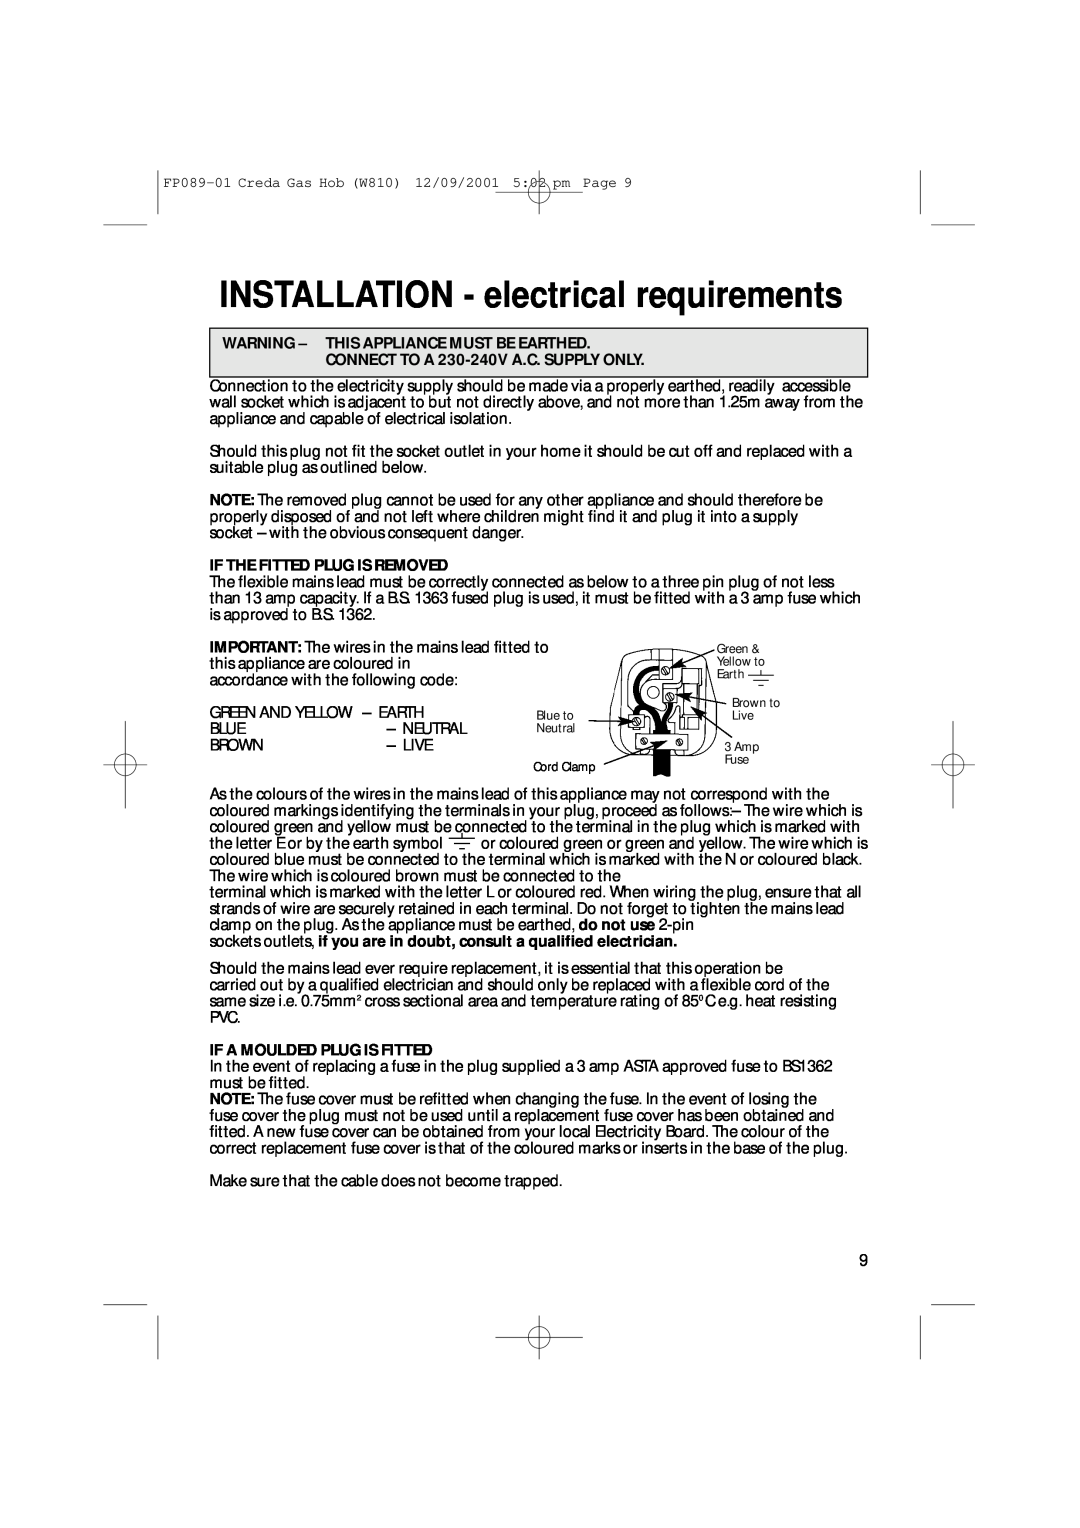 Creda W810 INSTALLATION - electrical requirements, Warning - This Appliance Must Be Earthed, If The Fitted Plug Is Removed 